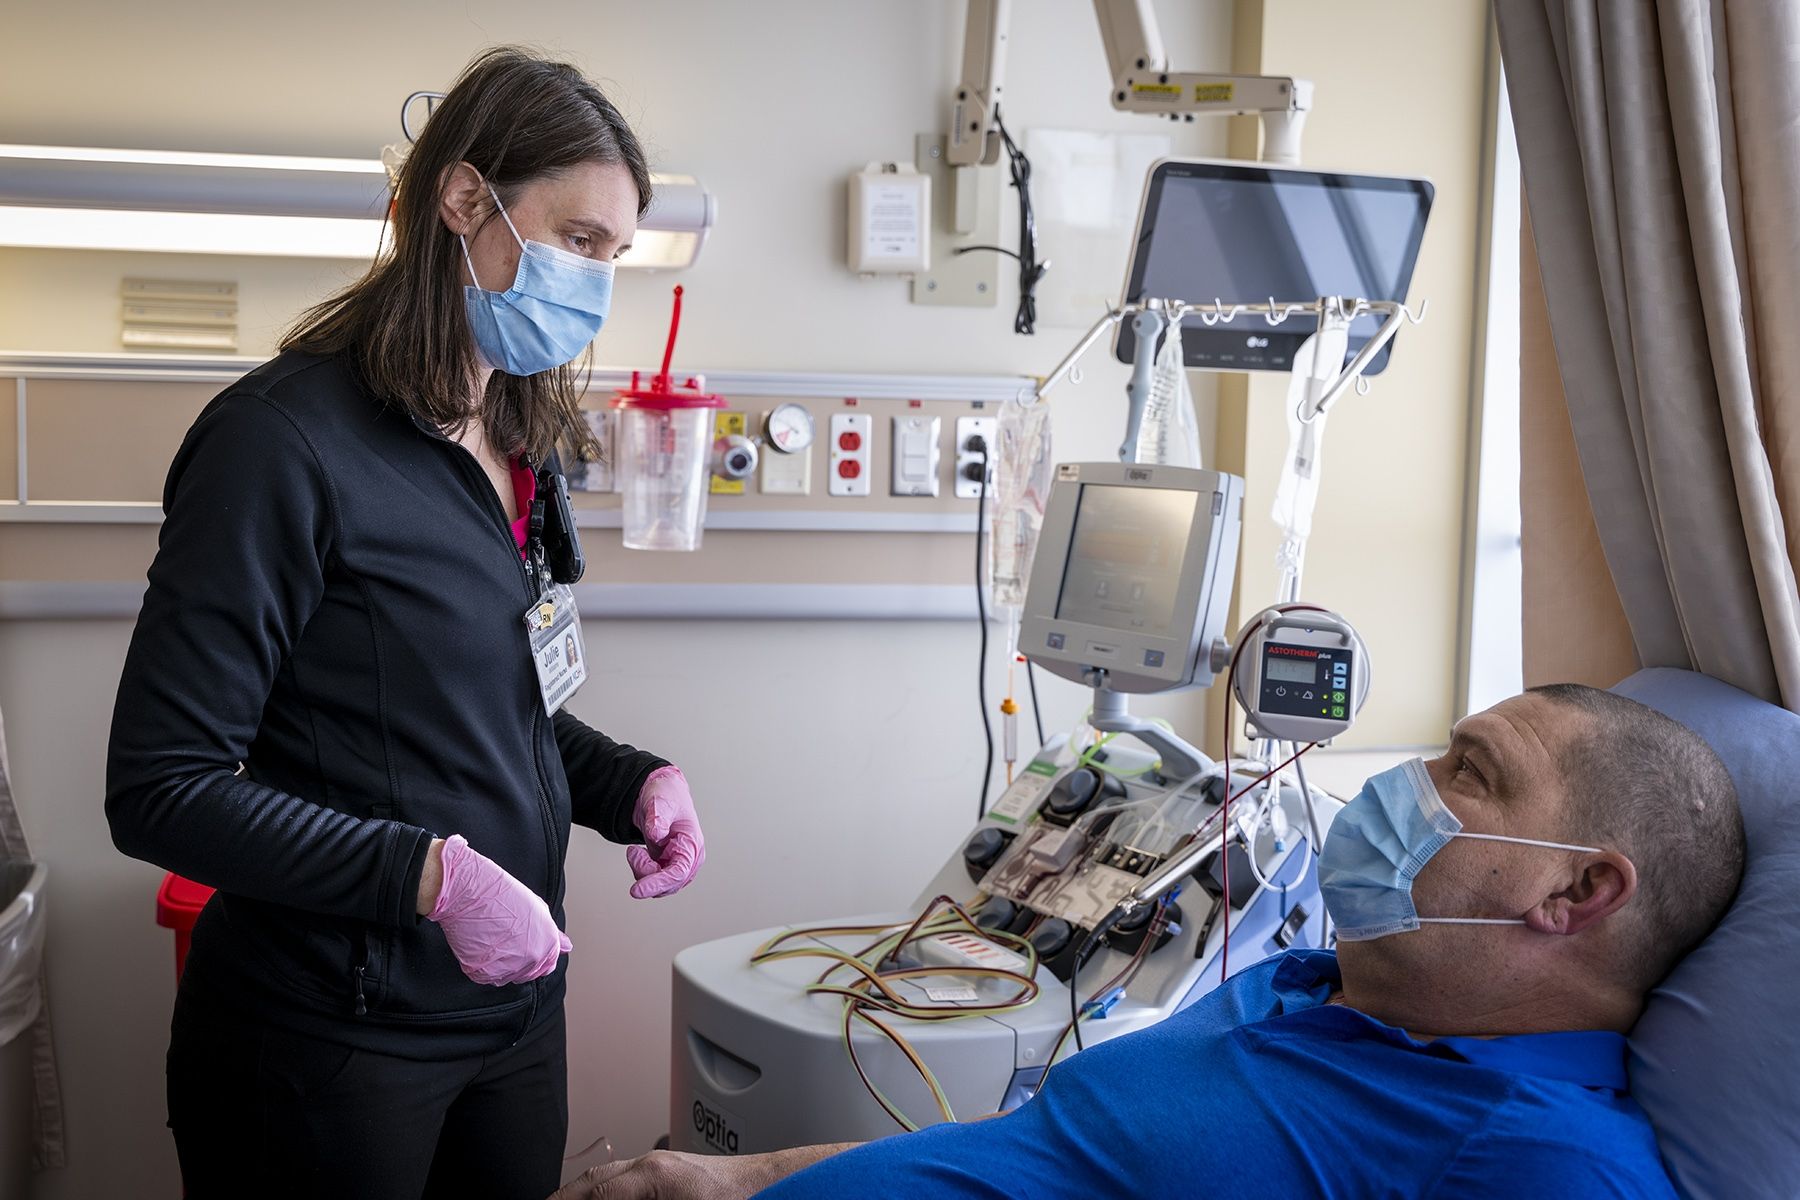 A KHSC nurse provides care to a patient during a Stem Cell transplant